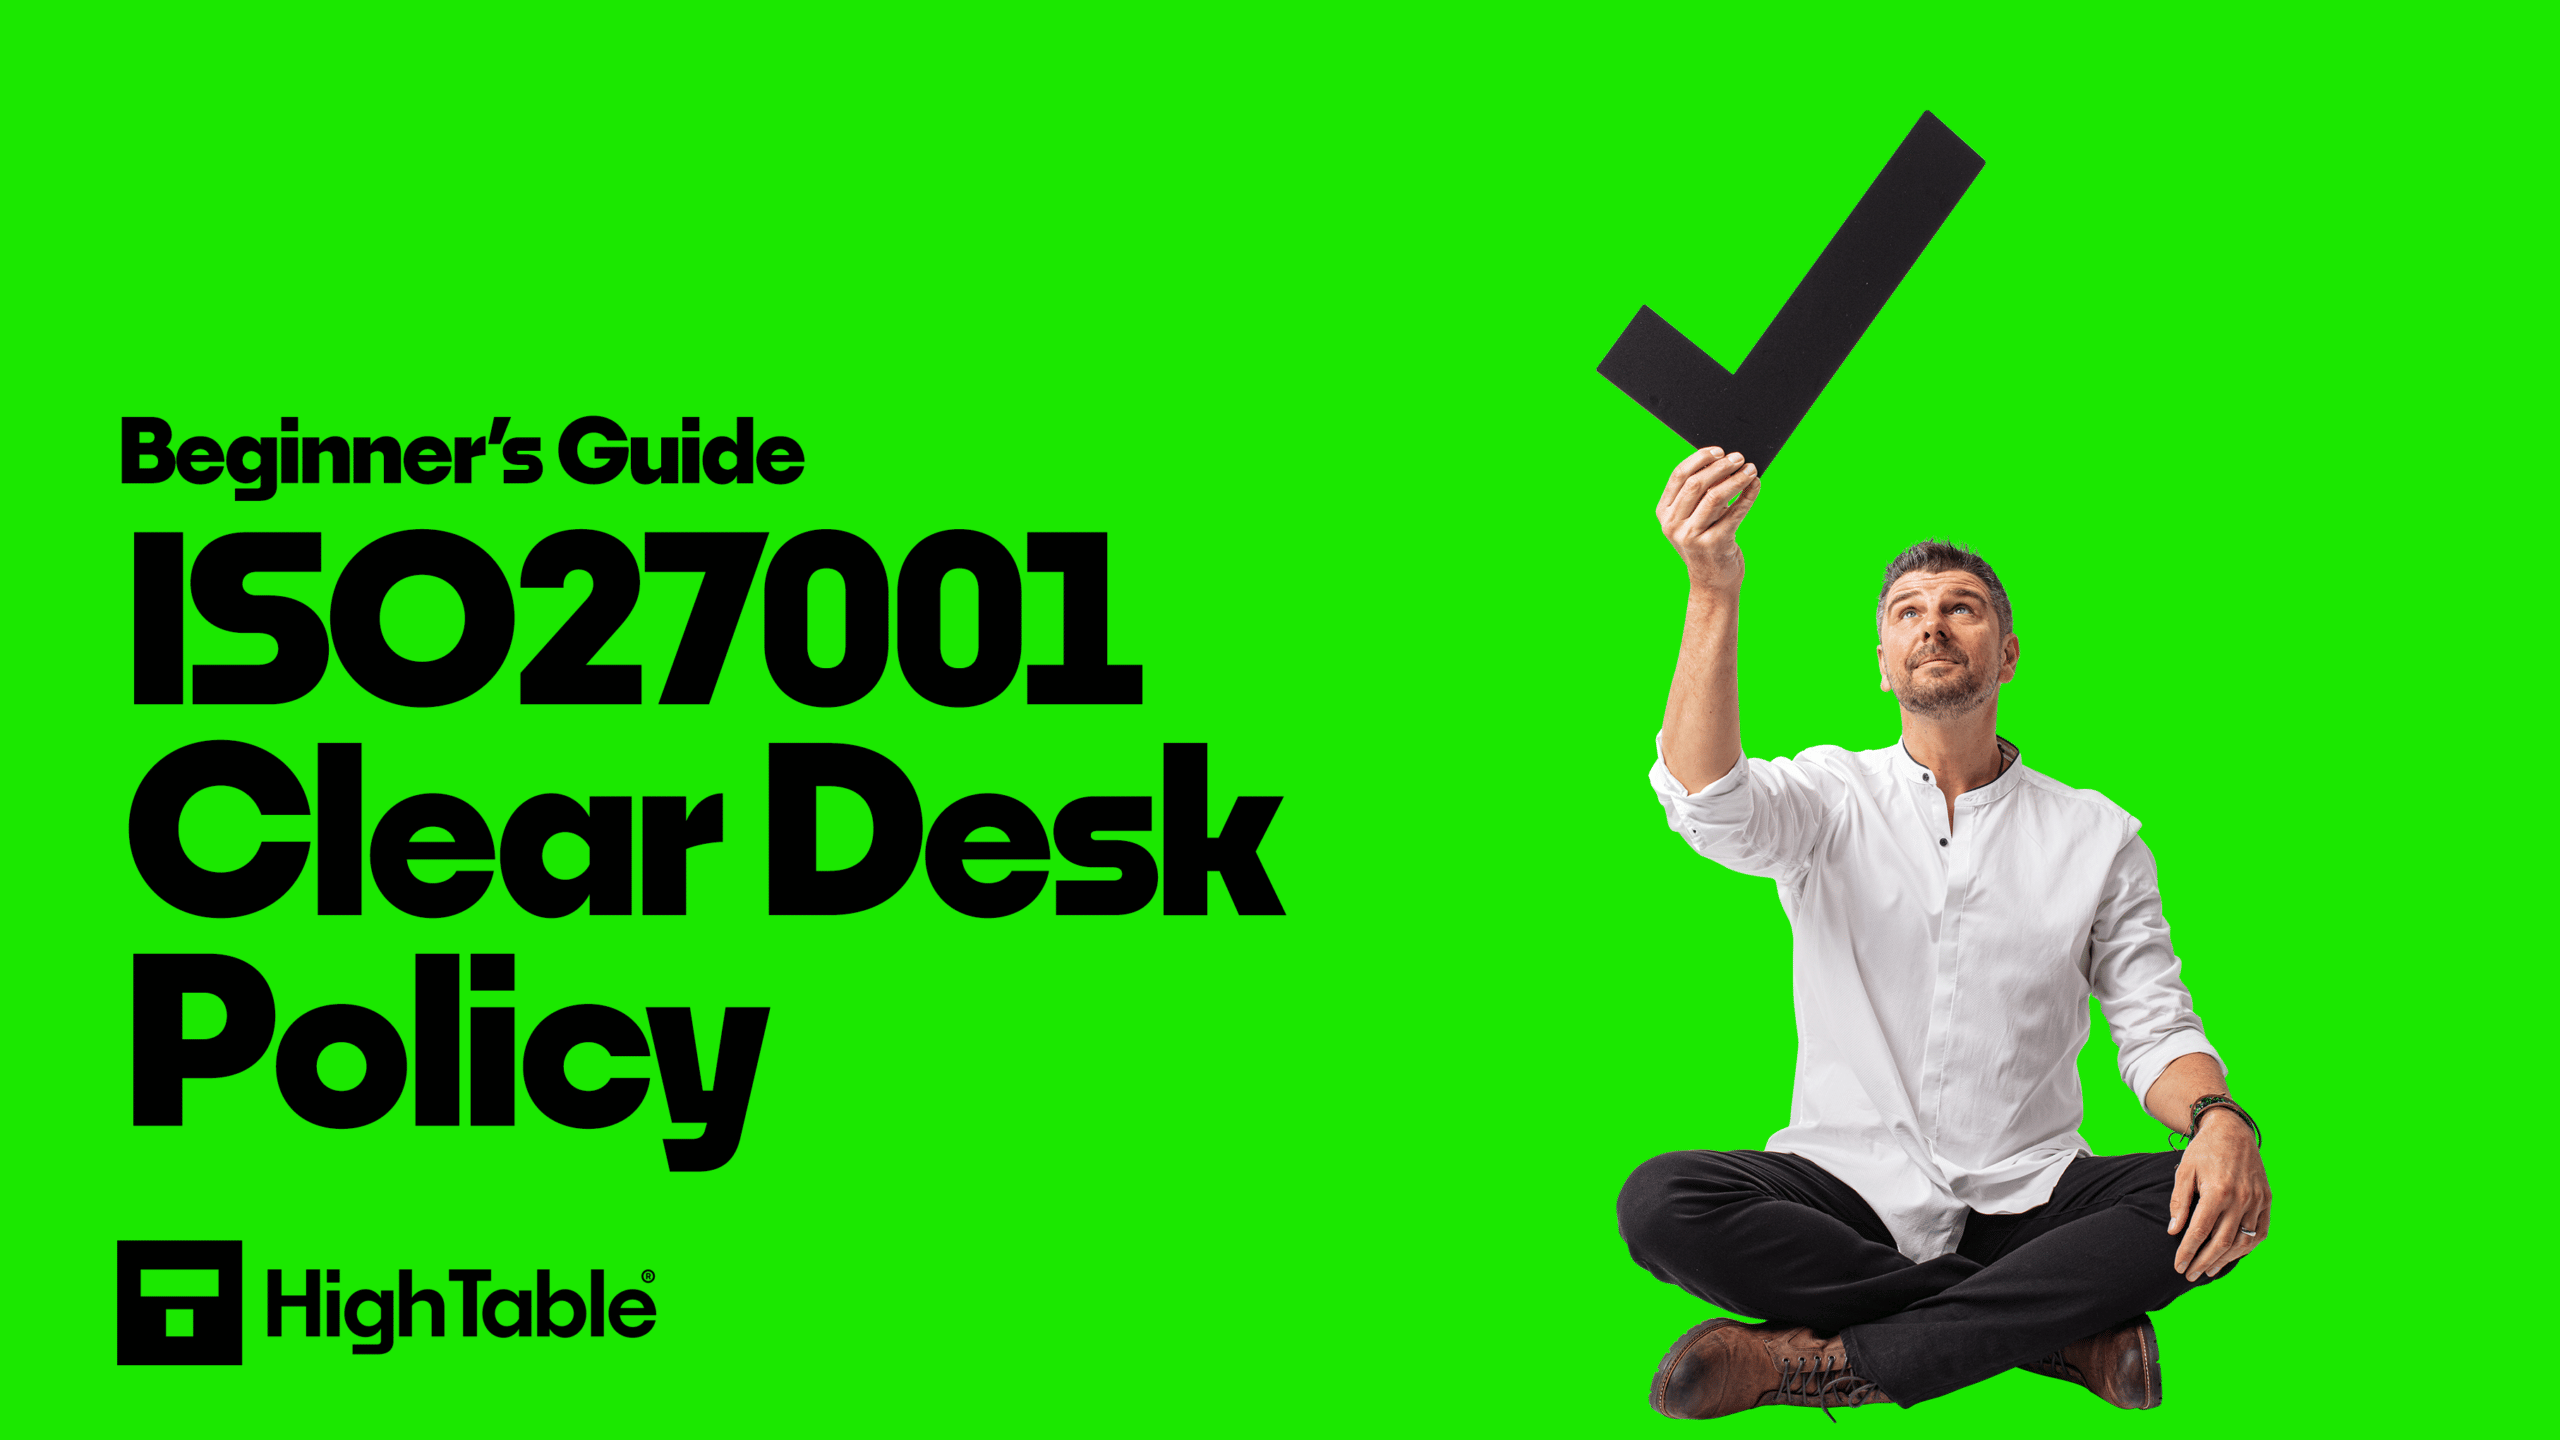 ISO 27001 Clear Desk Policy Beginner’s Guide